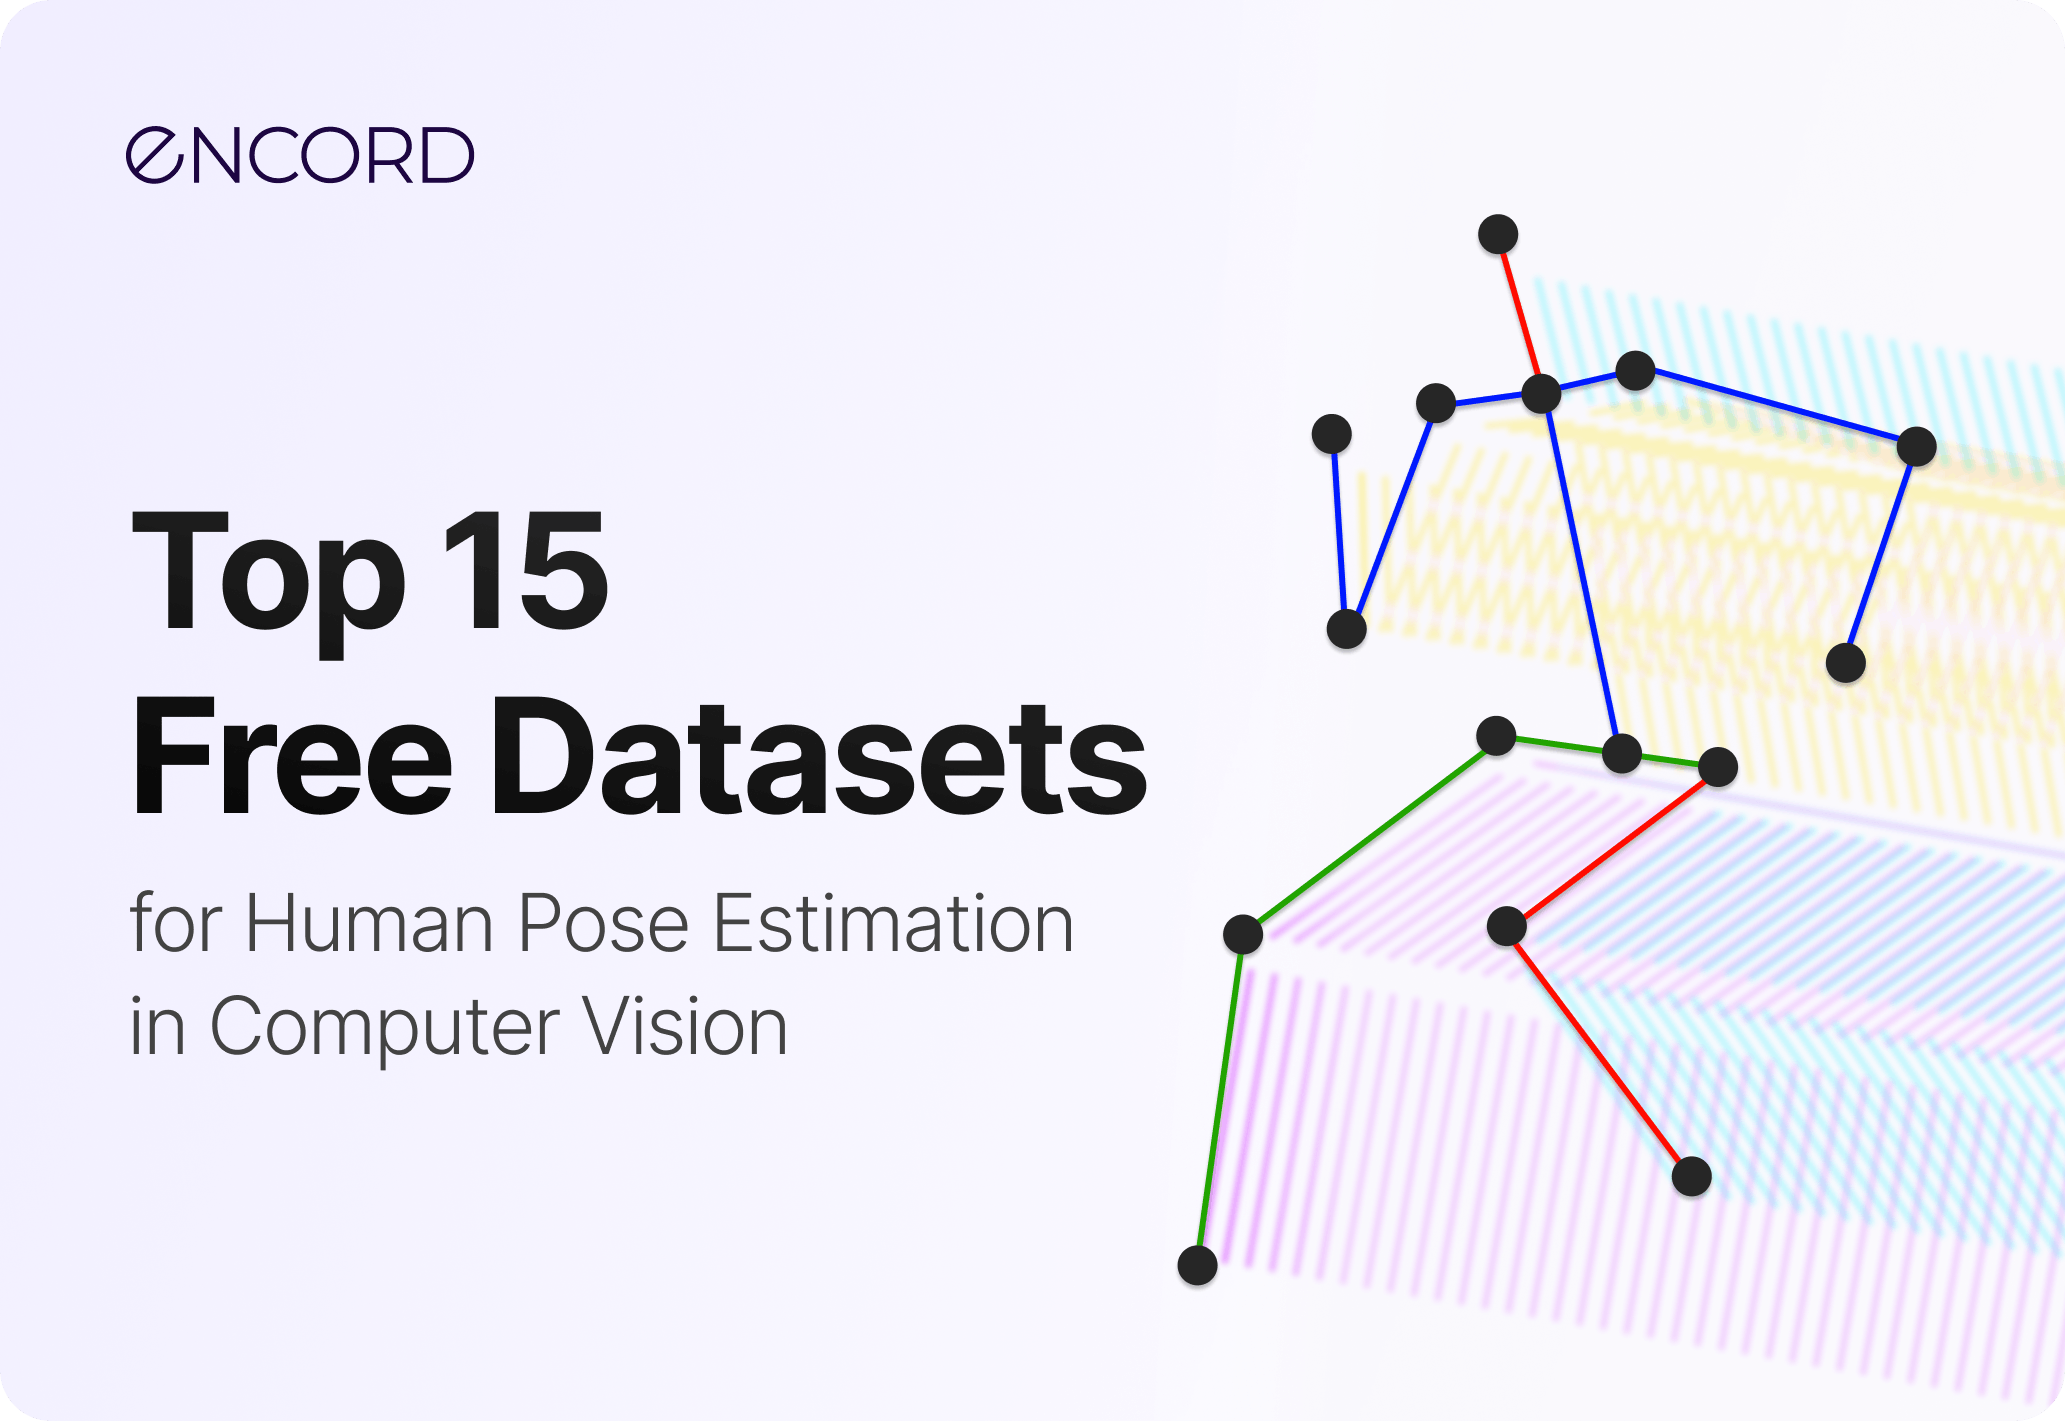 Top 15 Free Datasets for Human Pose Estimation in Computer Vision